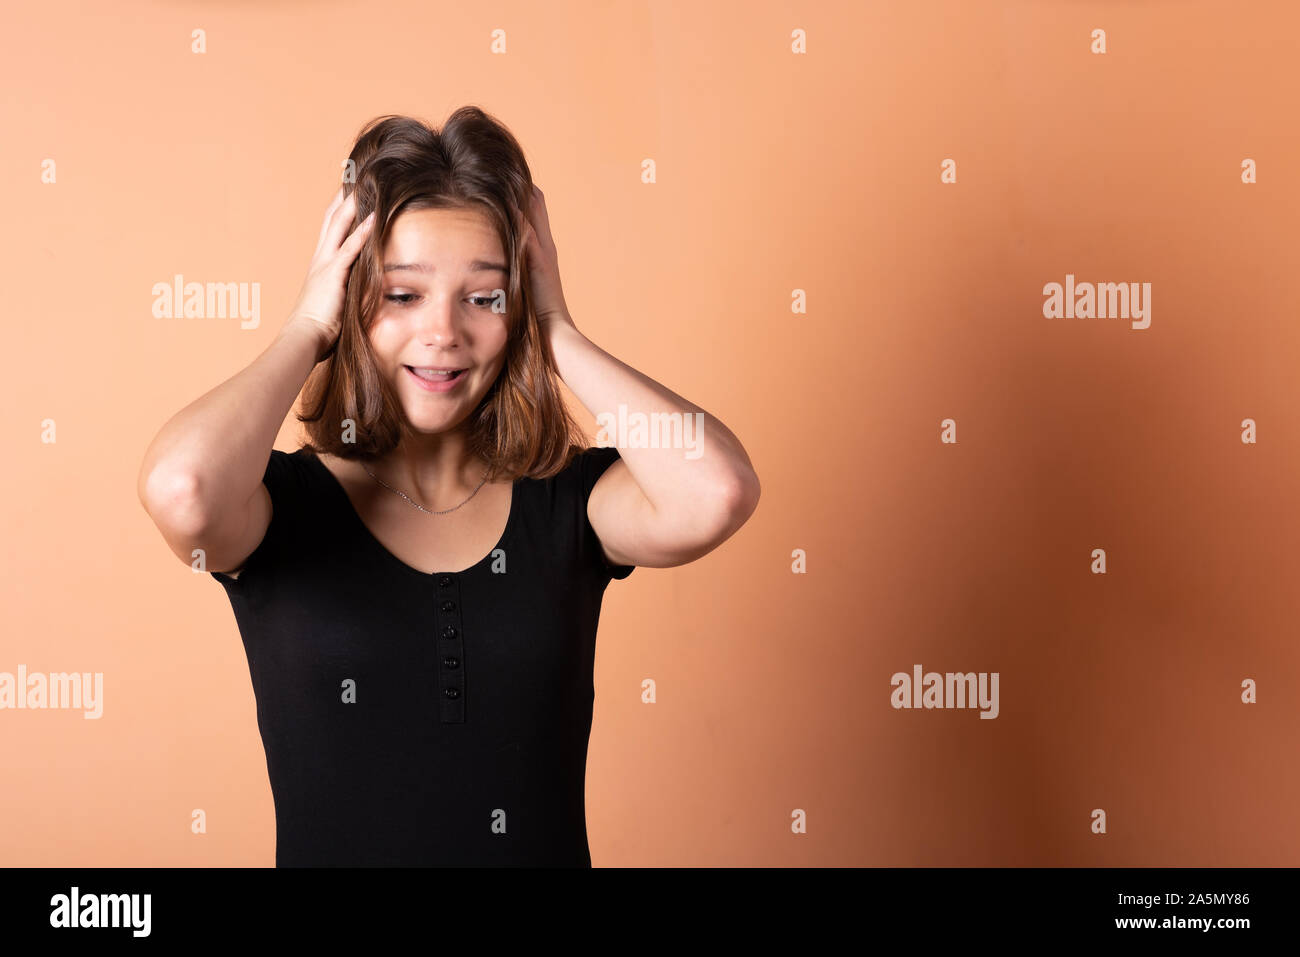 The girl is worried and holds on to her head, on a light orange background. Stock Photo